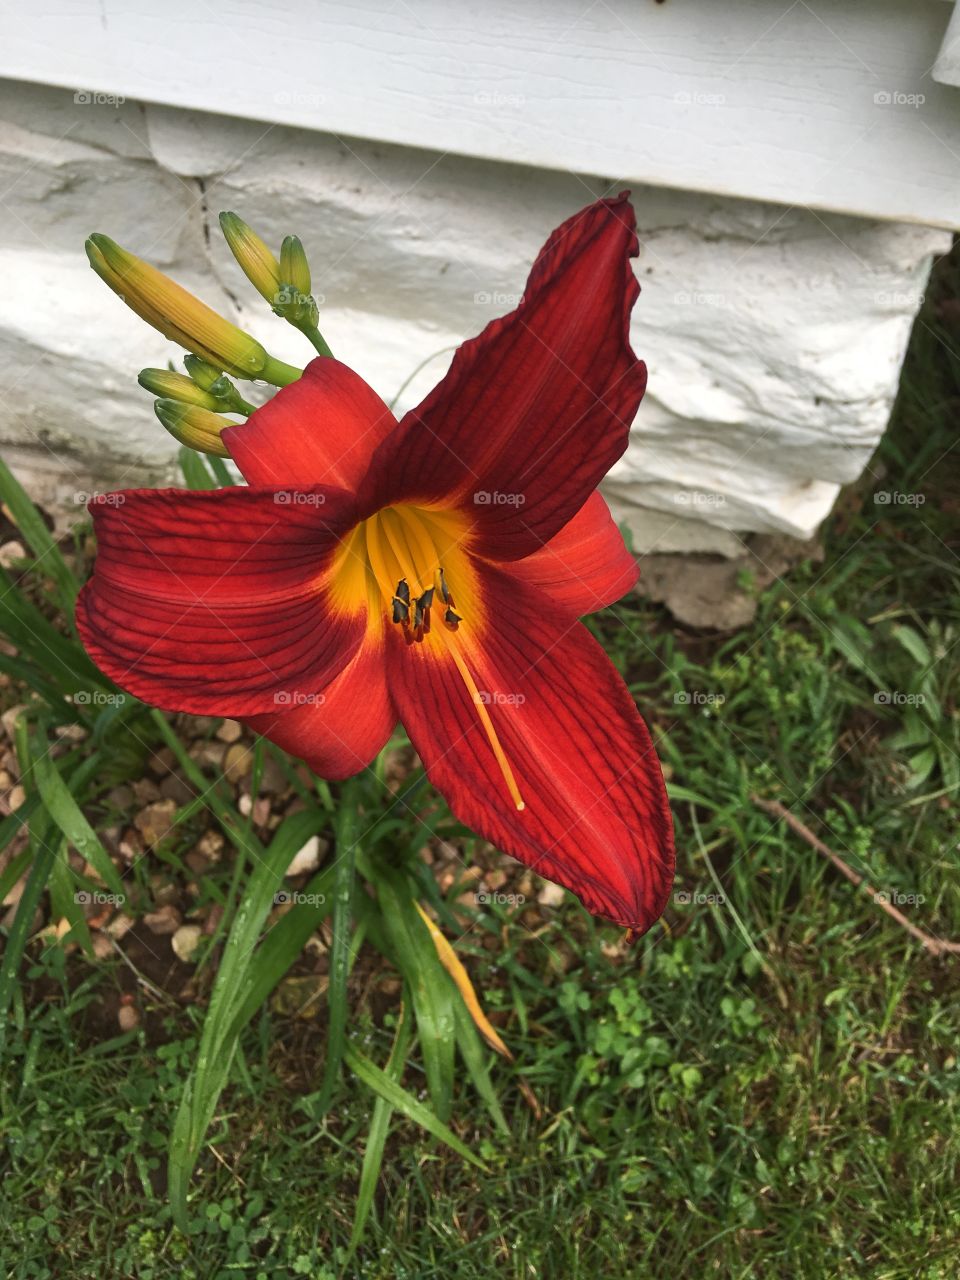 A friend and neighbor gave me three of these bulbs last year and so far one bloom!